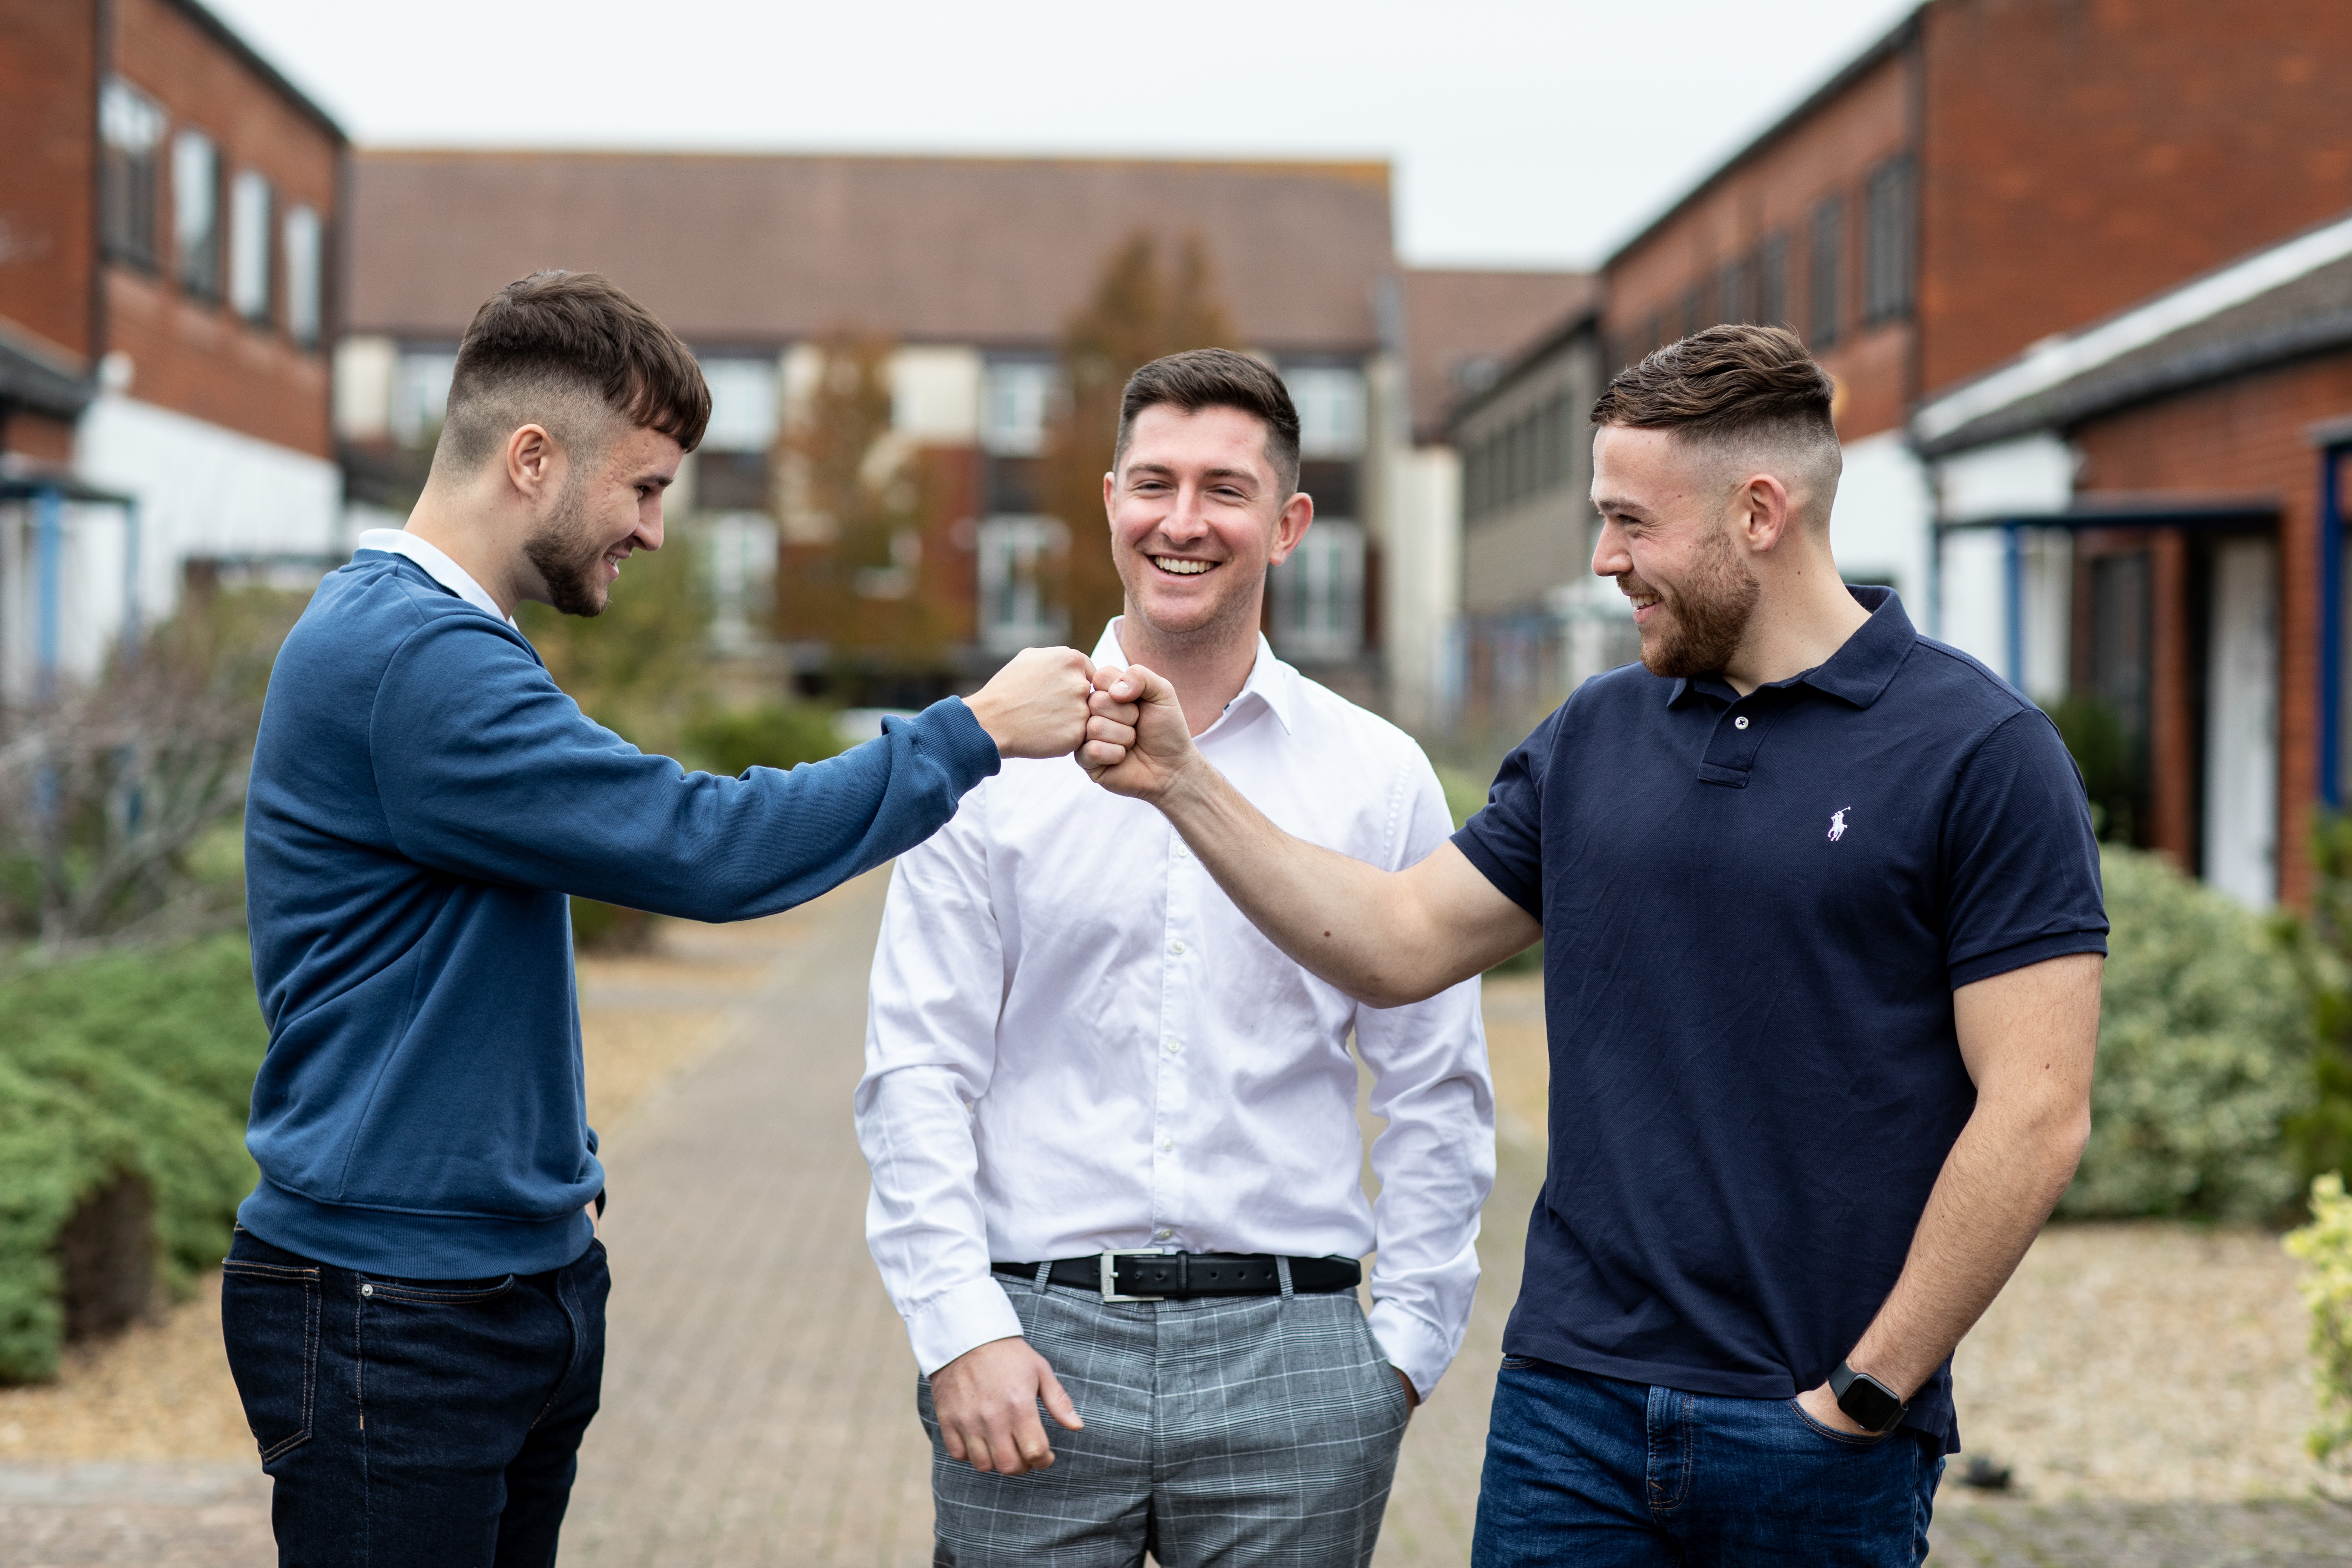 A photo of George, Sam and Tom, Aaron Wallis Sales Recruitment